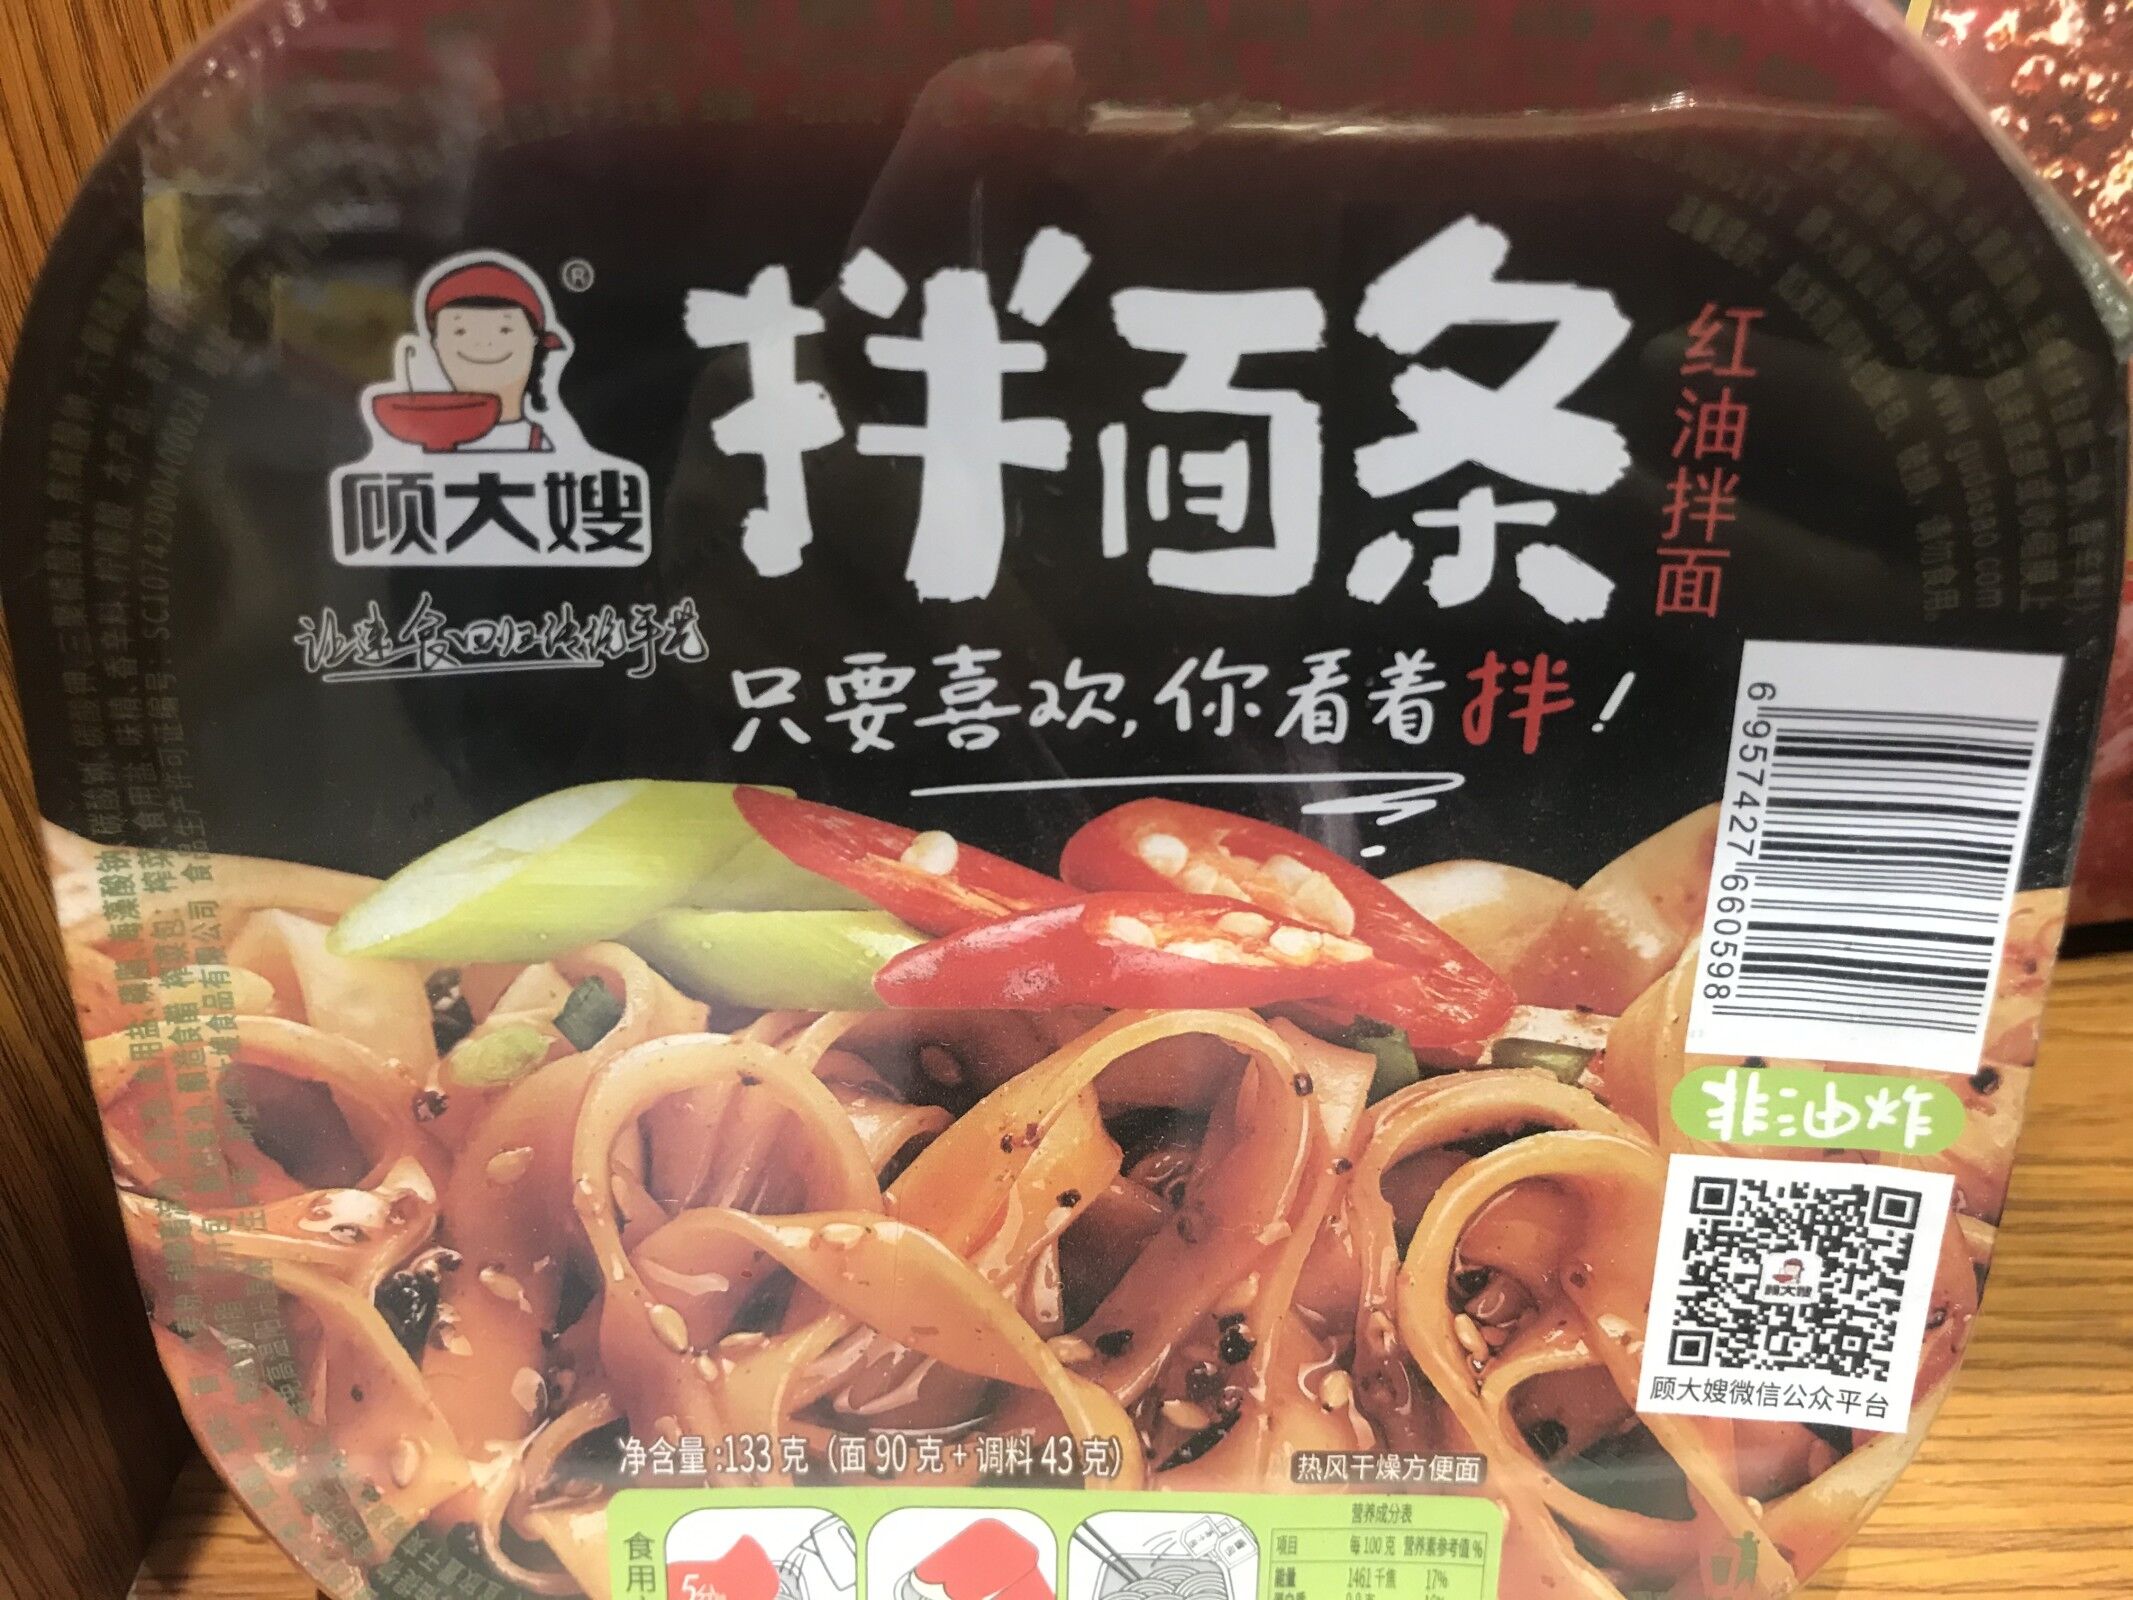 117 other foods: Mixed noodles 